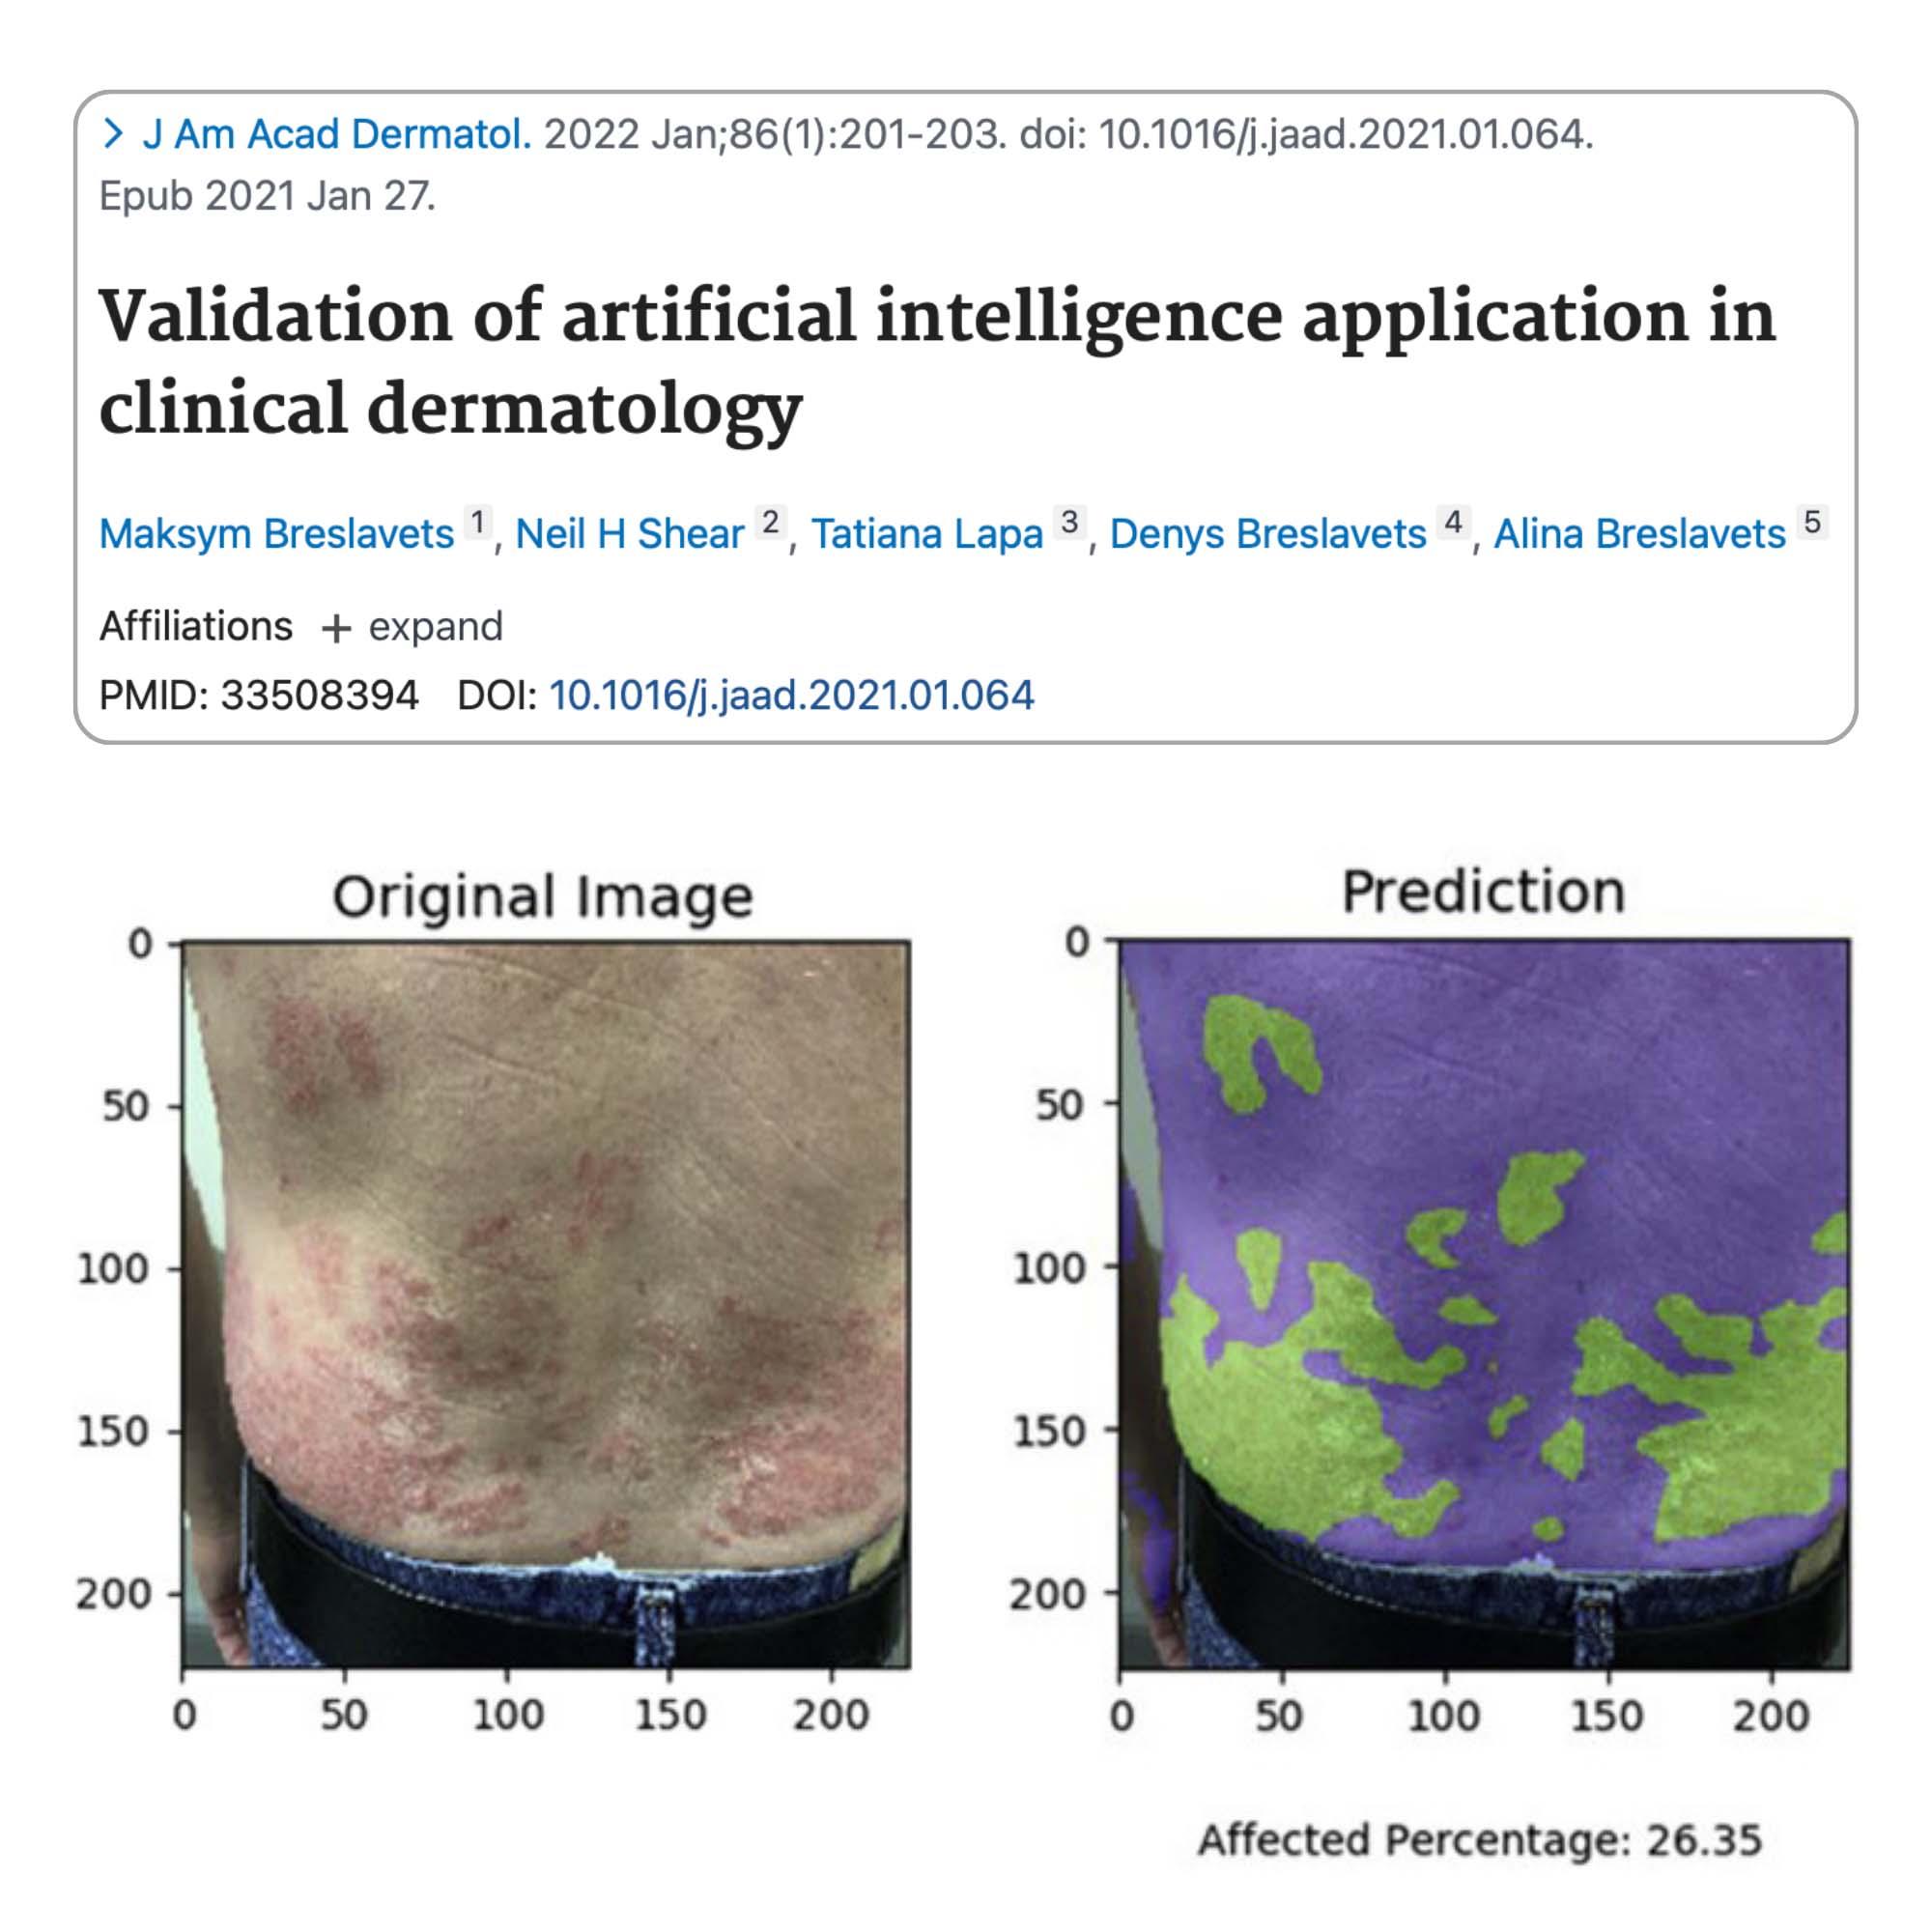 Validation of Artificial Intelligence Application in Clinical Dermatology